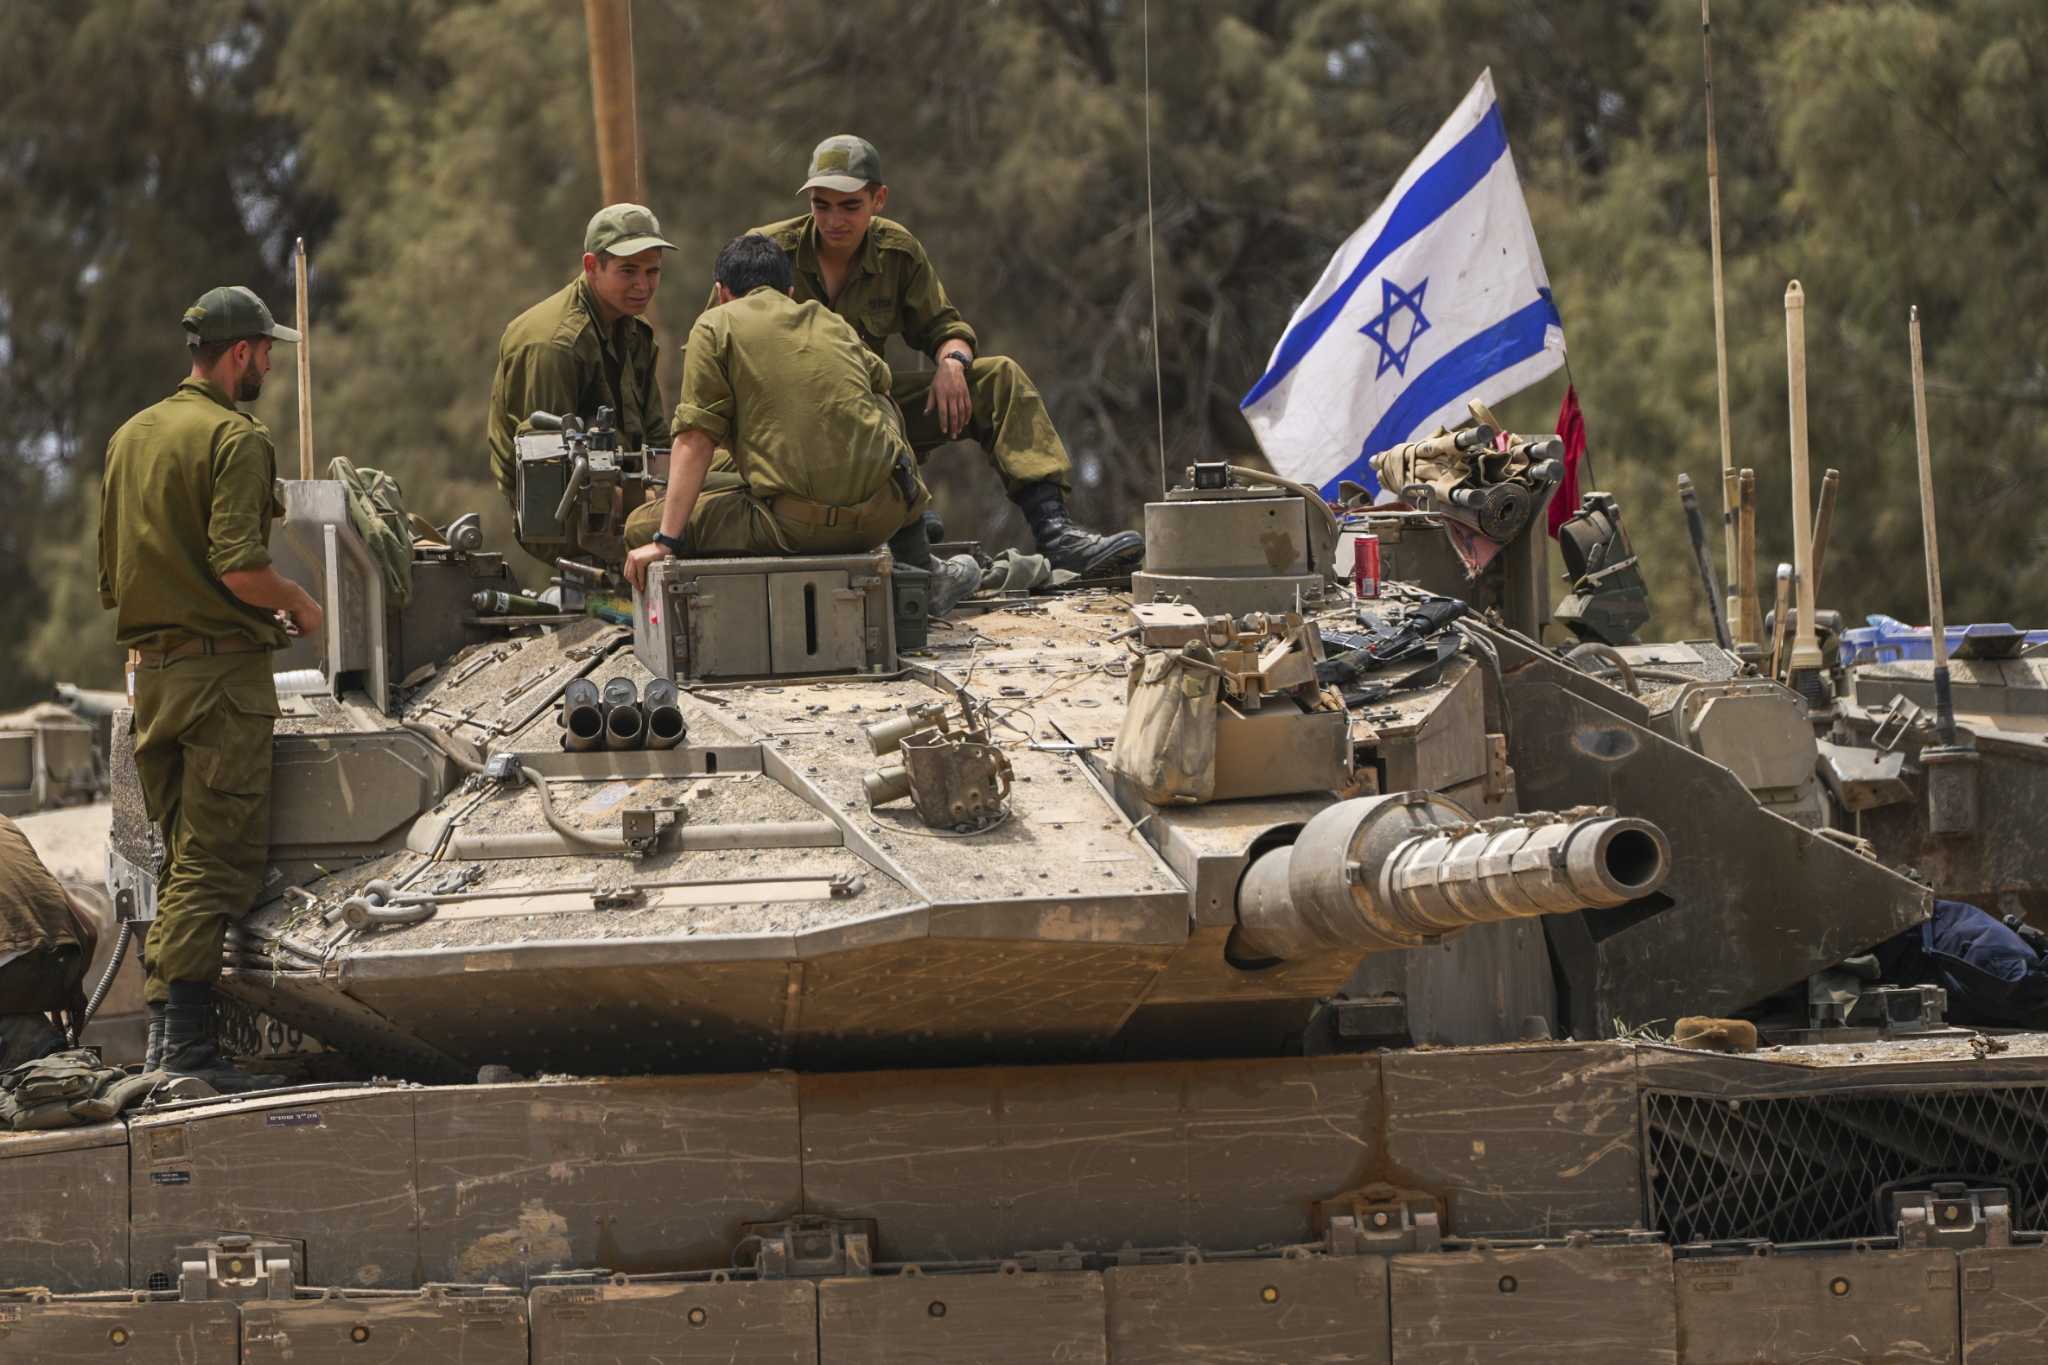 The Latest | 3 Israeli soldiers killed in an ambush explosion as Rafah offensive widens